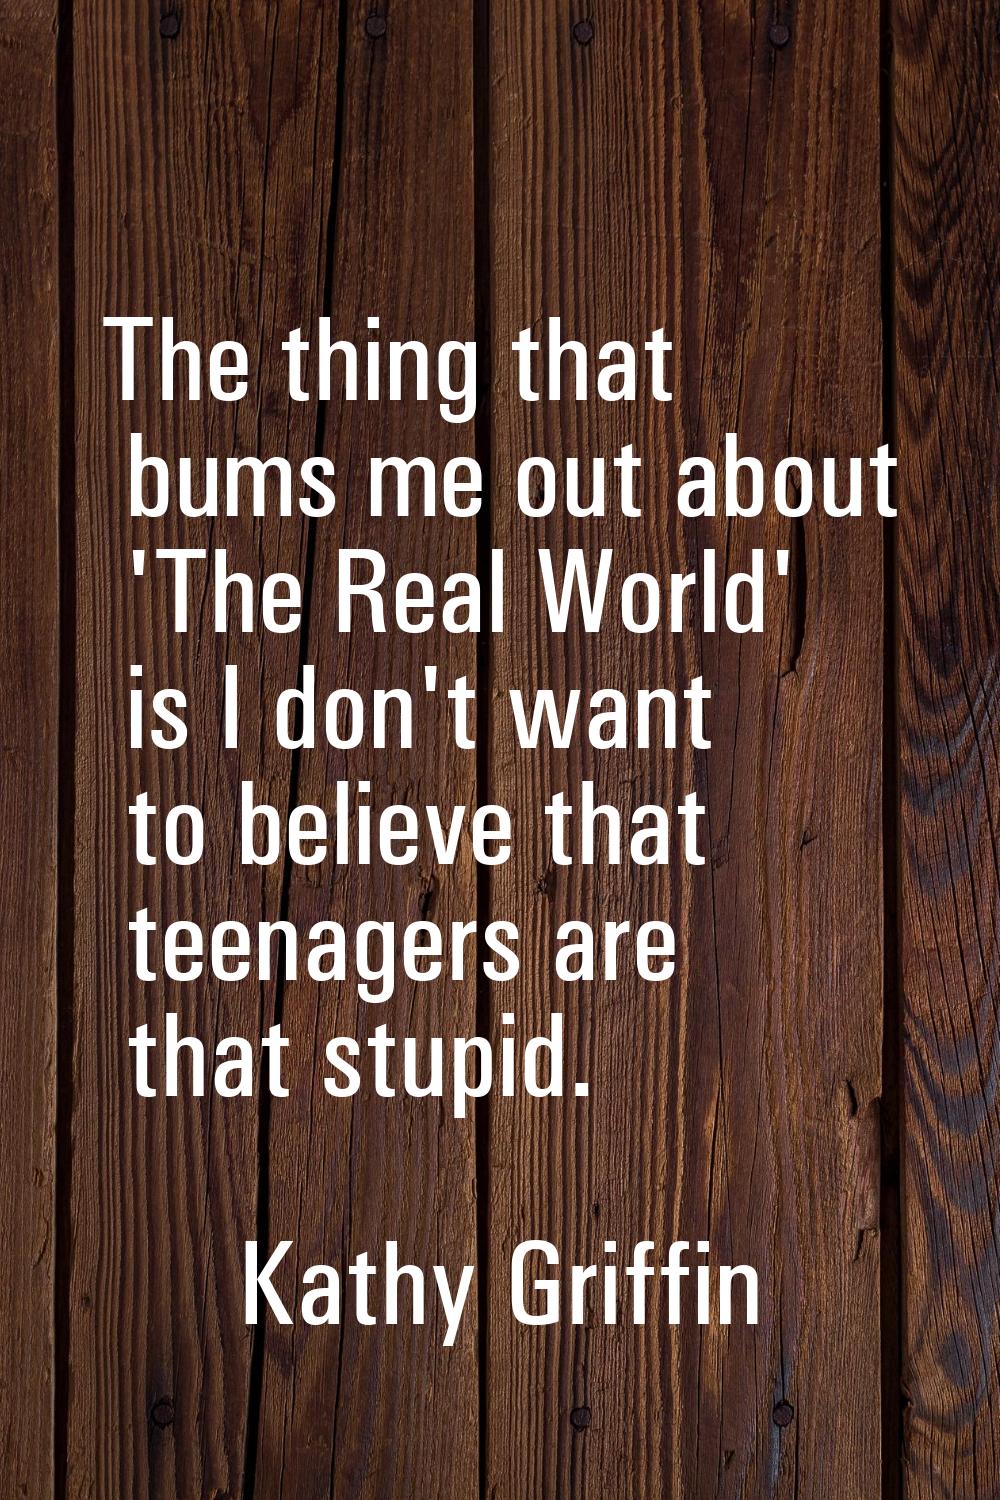 The thing that bums me out about 'The Real World' is I don't want to believe that teenagers are tha